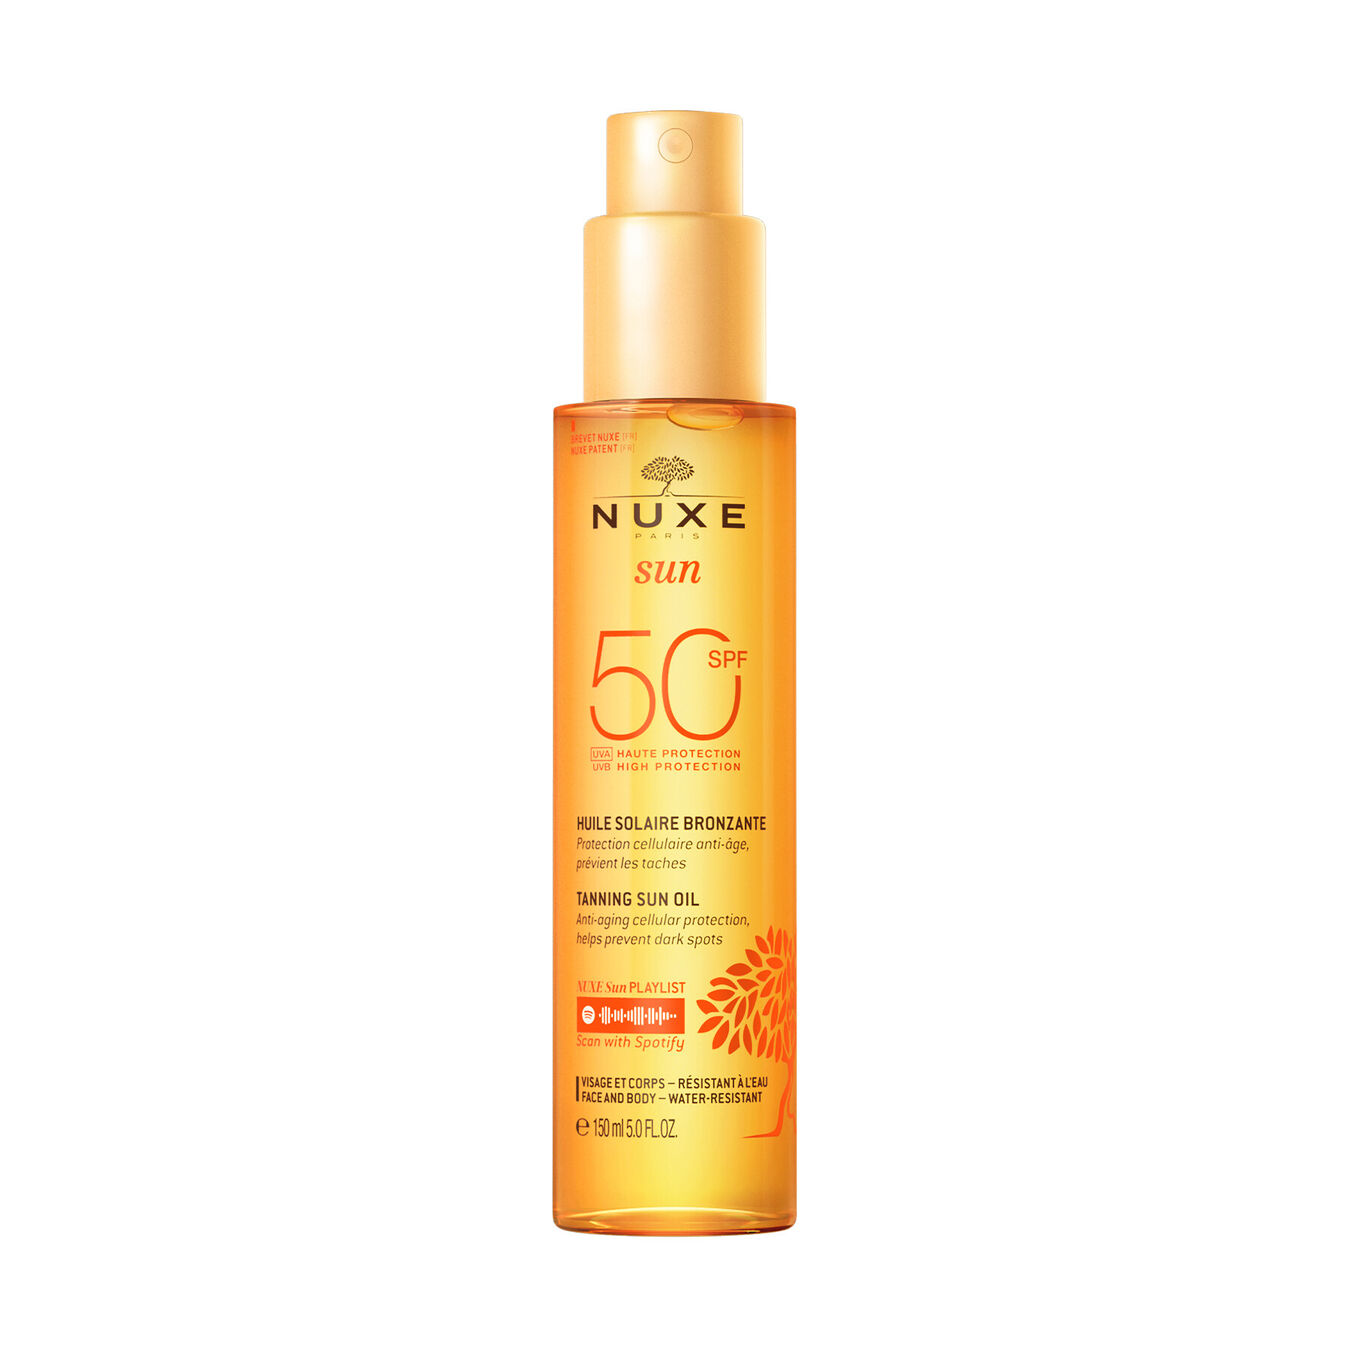 NUXE Huile Solaire Bronzante SPF 50 Protection cellulaire anti-age